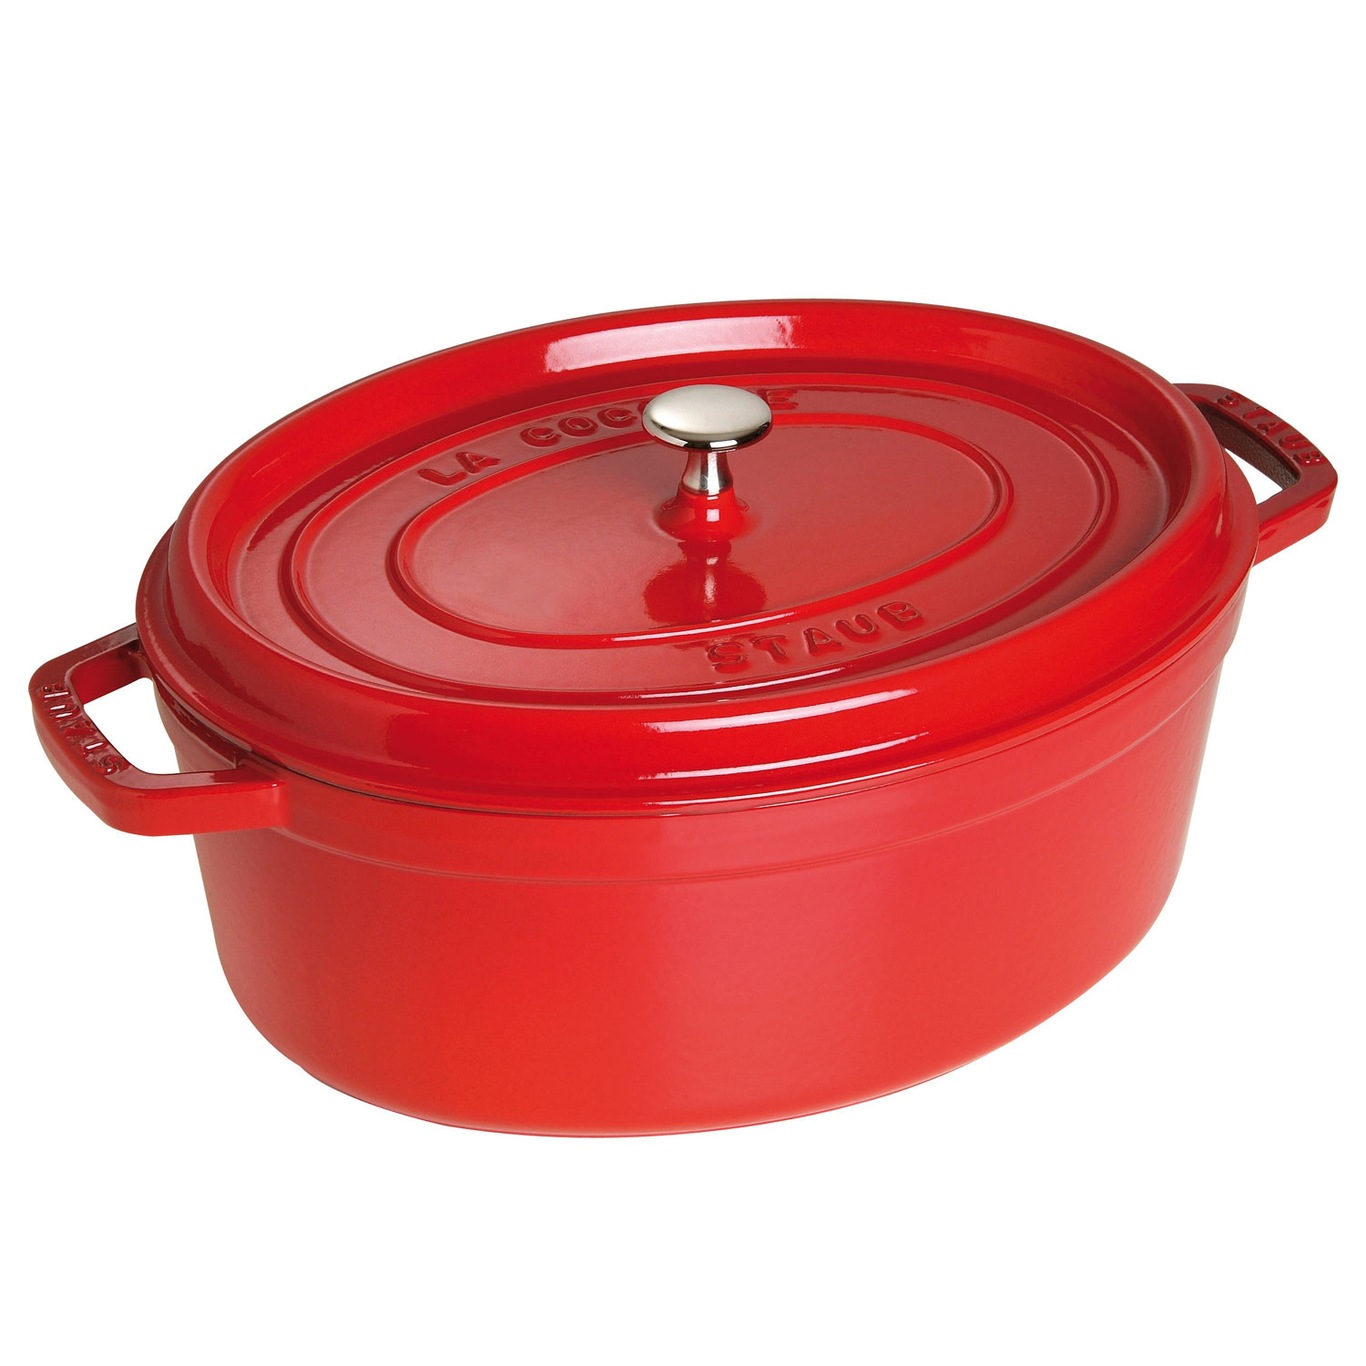 Staub Oval Cocotte 31 cm 5,5 L, Red